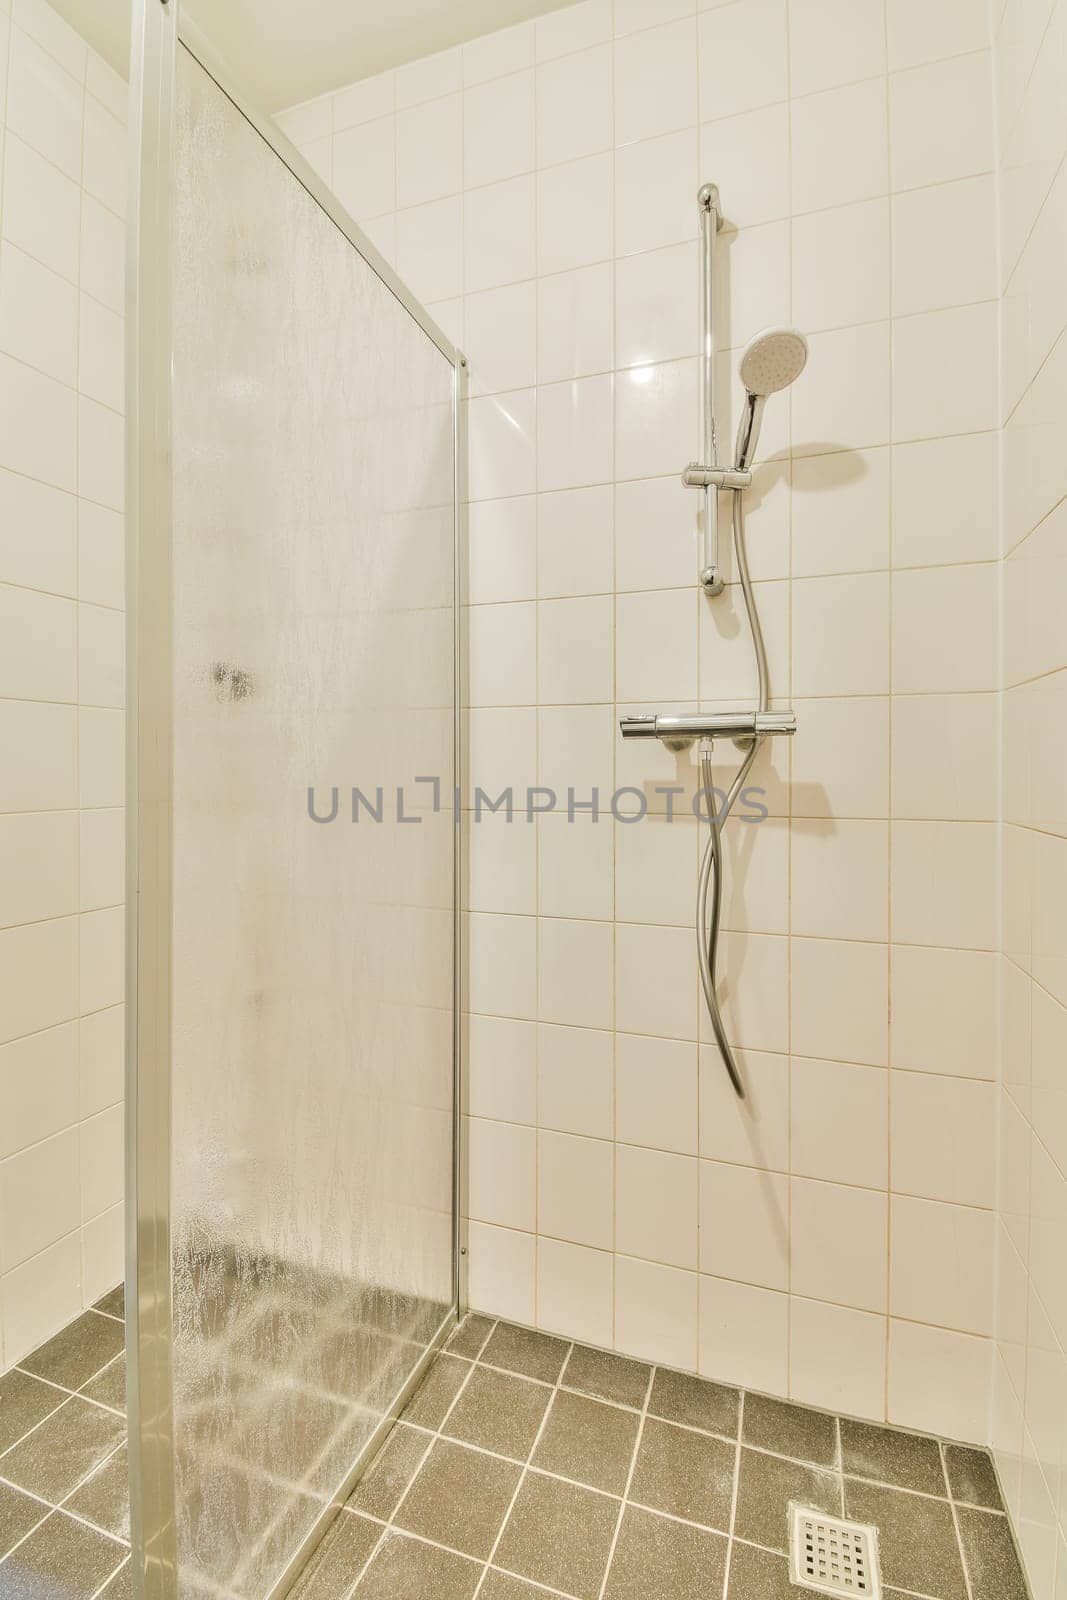 a shower stall with water coming from the shower head and hand held up to it's side, in a white tiled bathroom